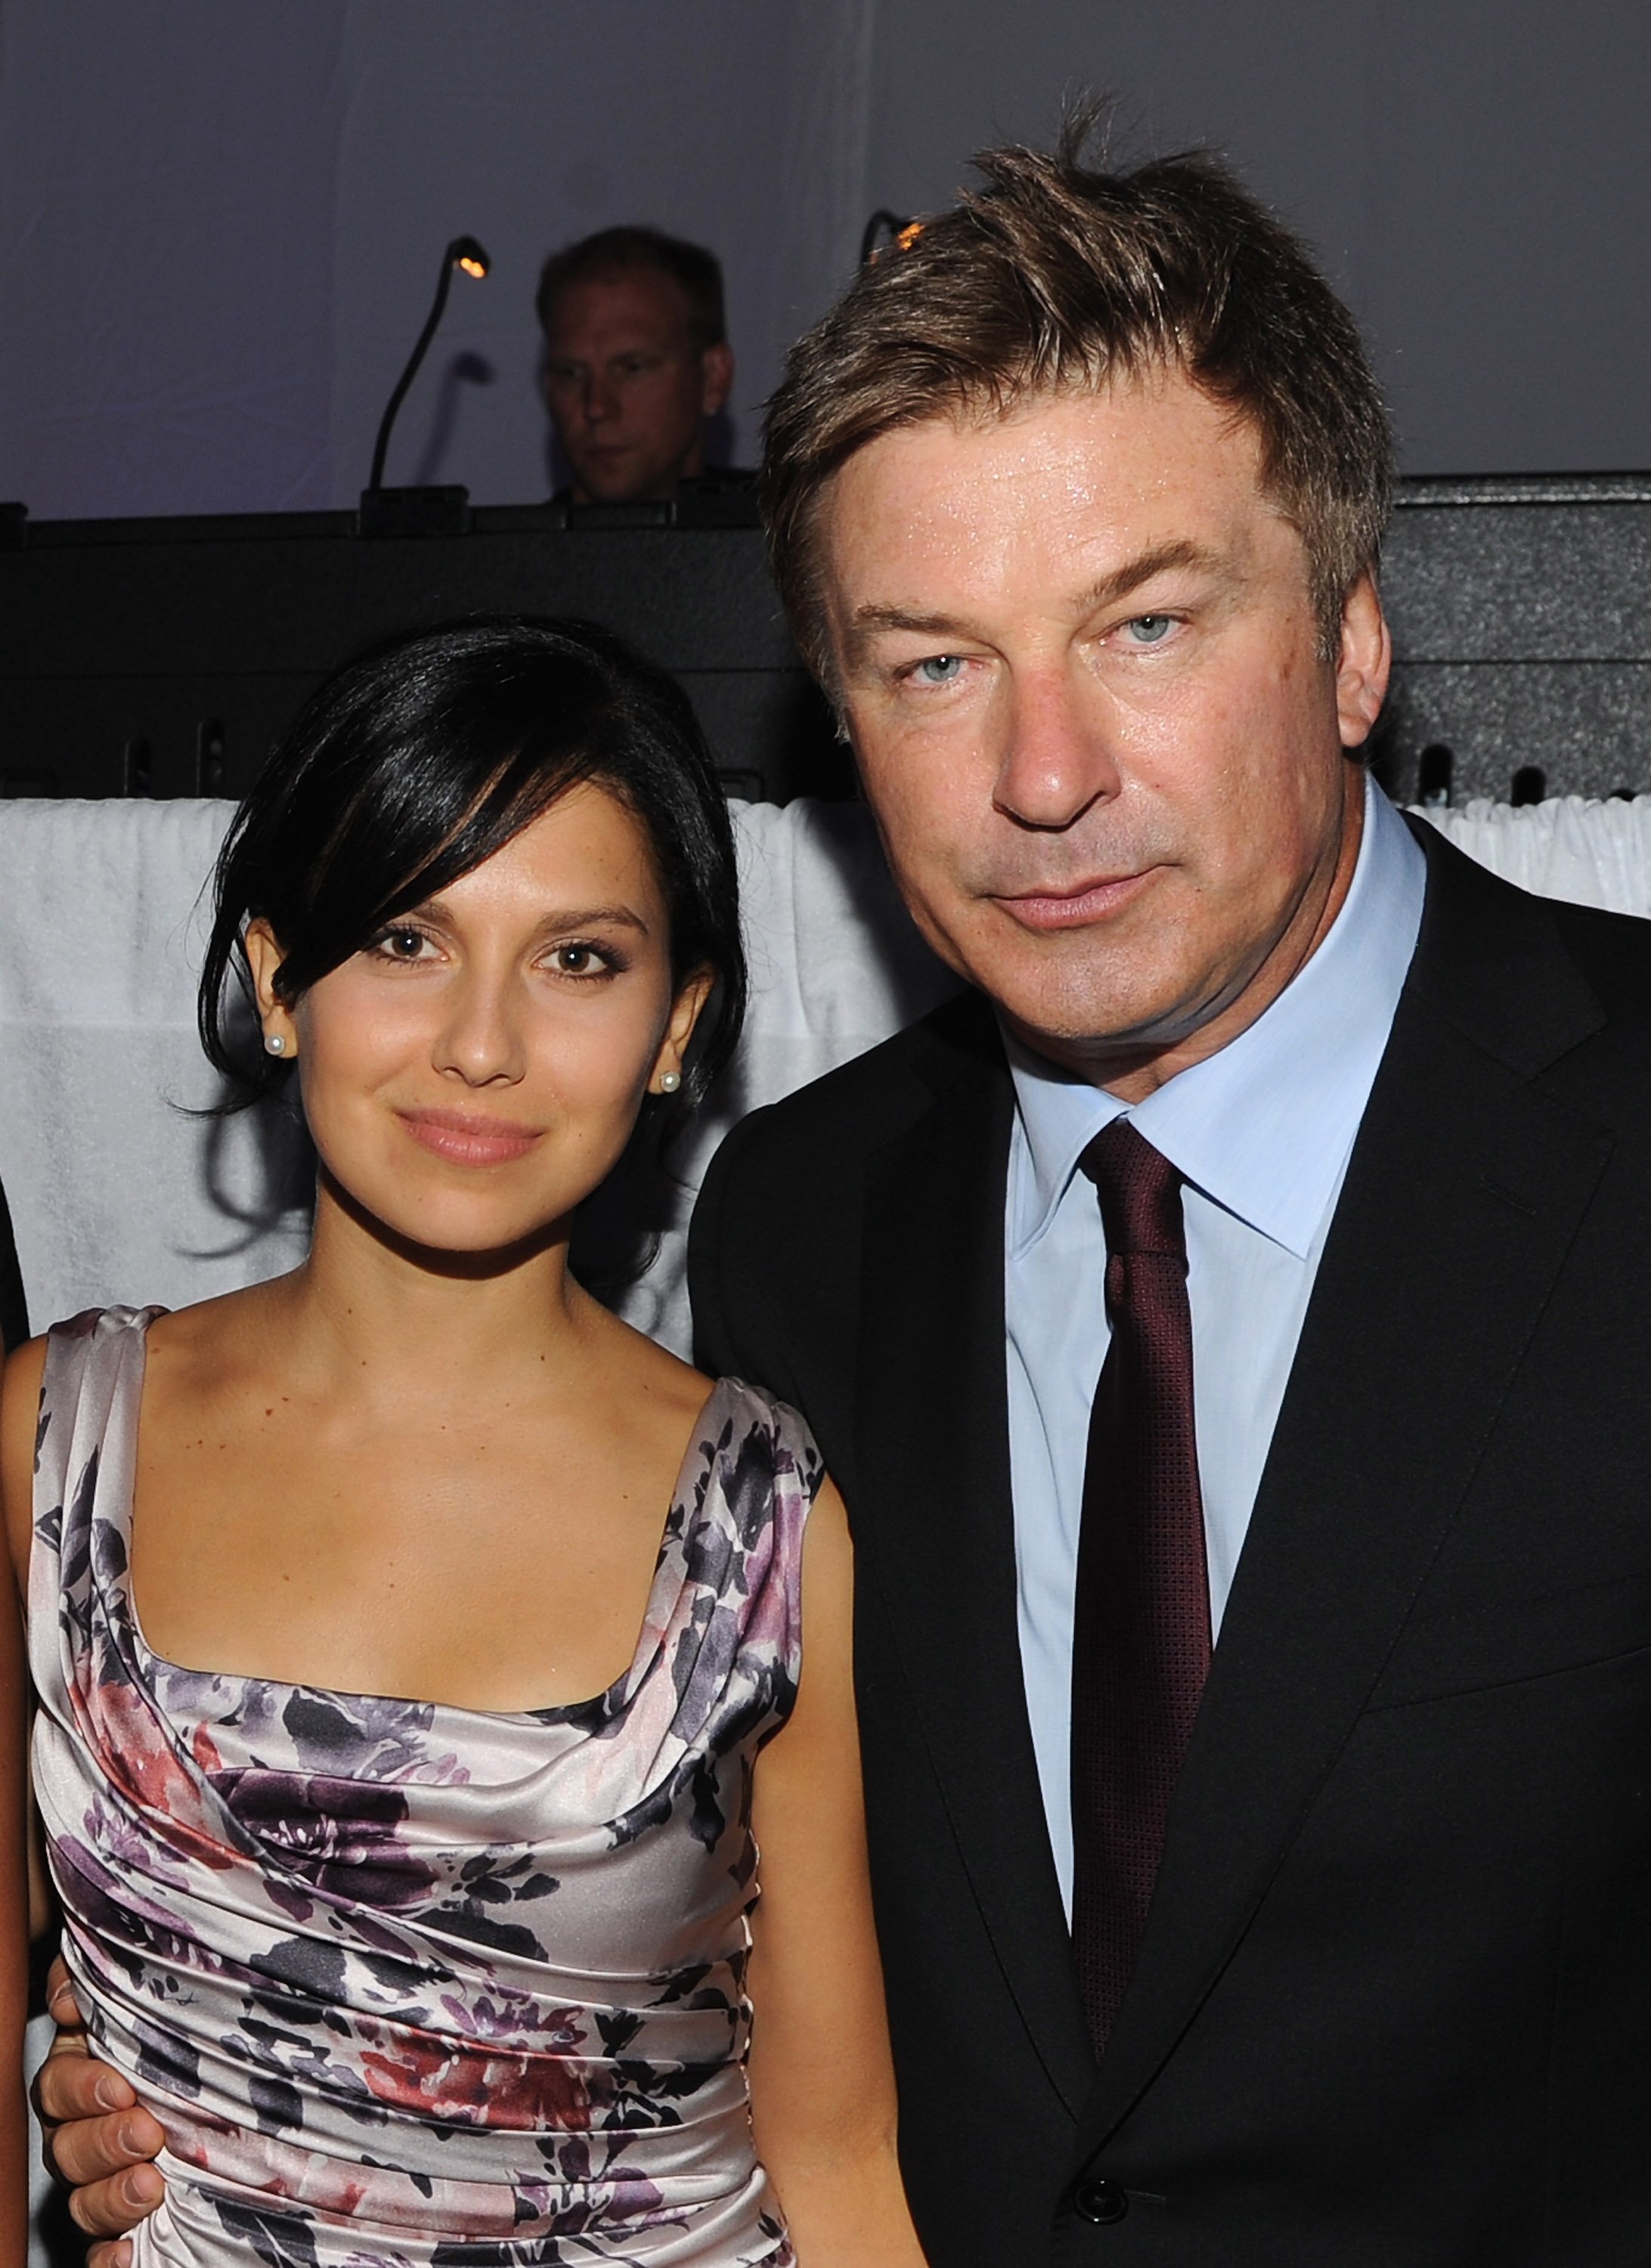 Hilaria Thomas and Alec Baldwin attend Tony Bennett's 85th Birthday Gala Benefit for Exploring the Arts at The Metropolitan Opera House on September 18, 2011 in New York City. | Source: Getty Images